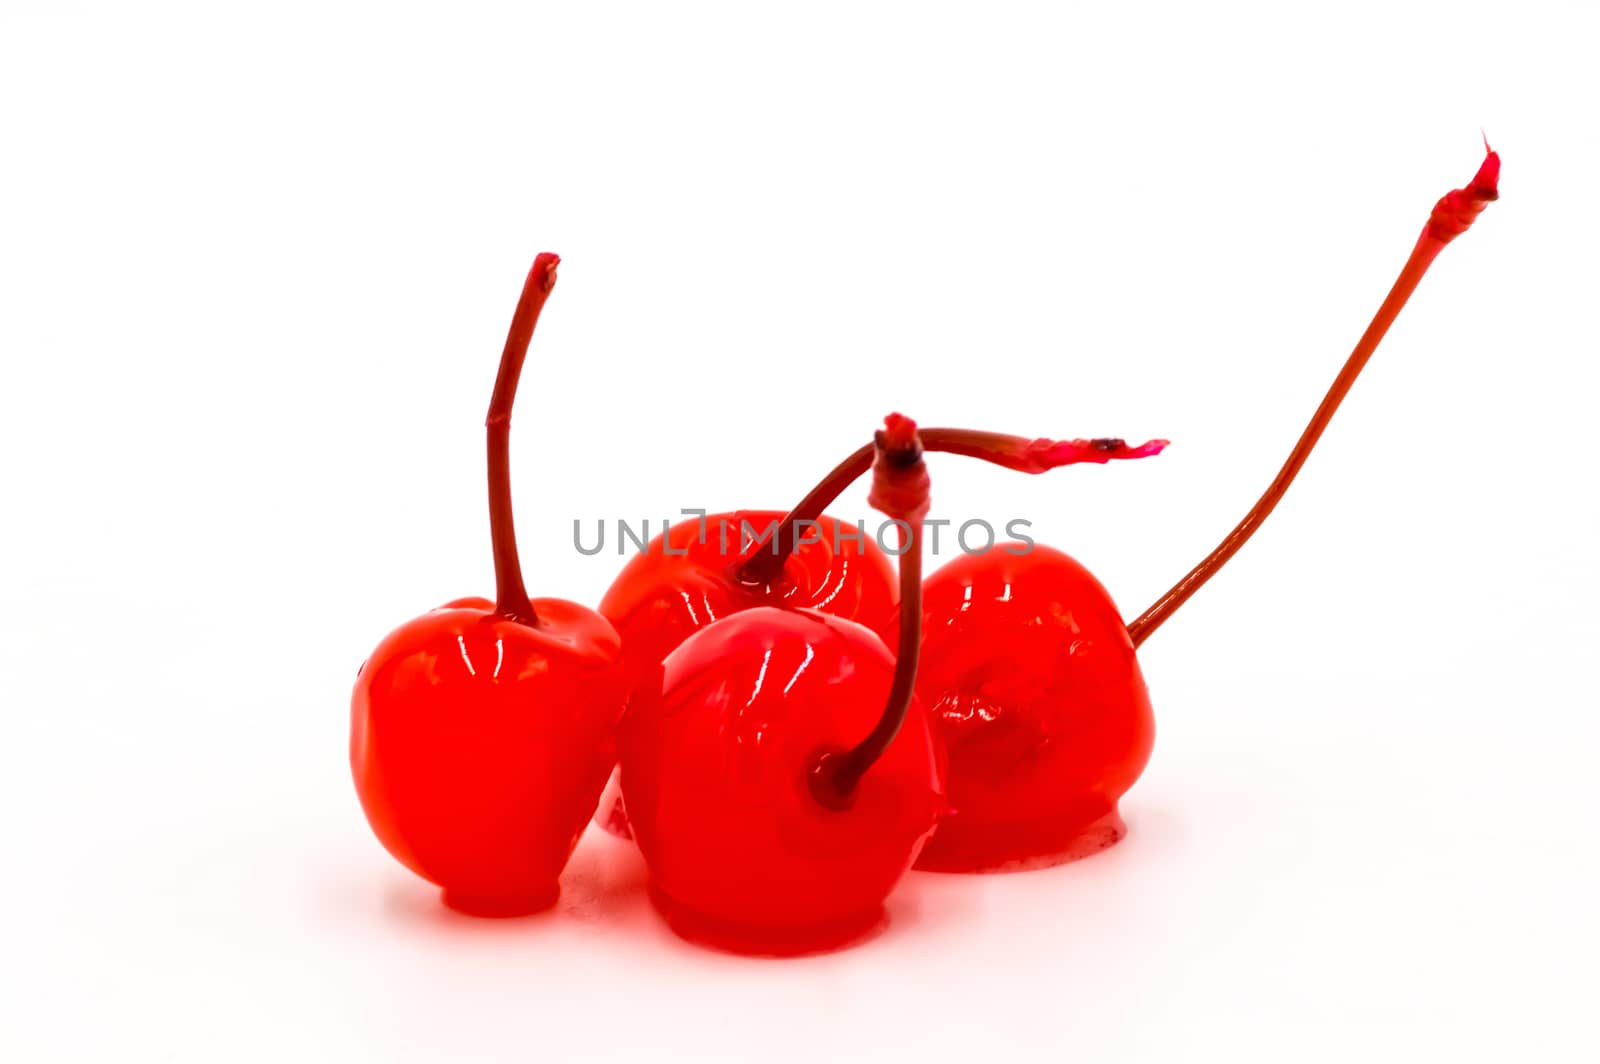 Group of four candied cherries with their stems on a white background